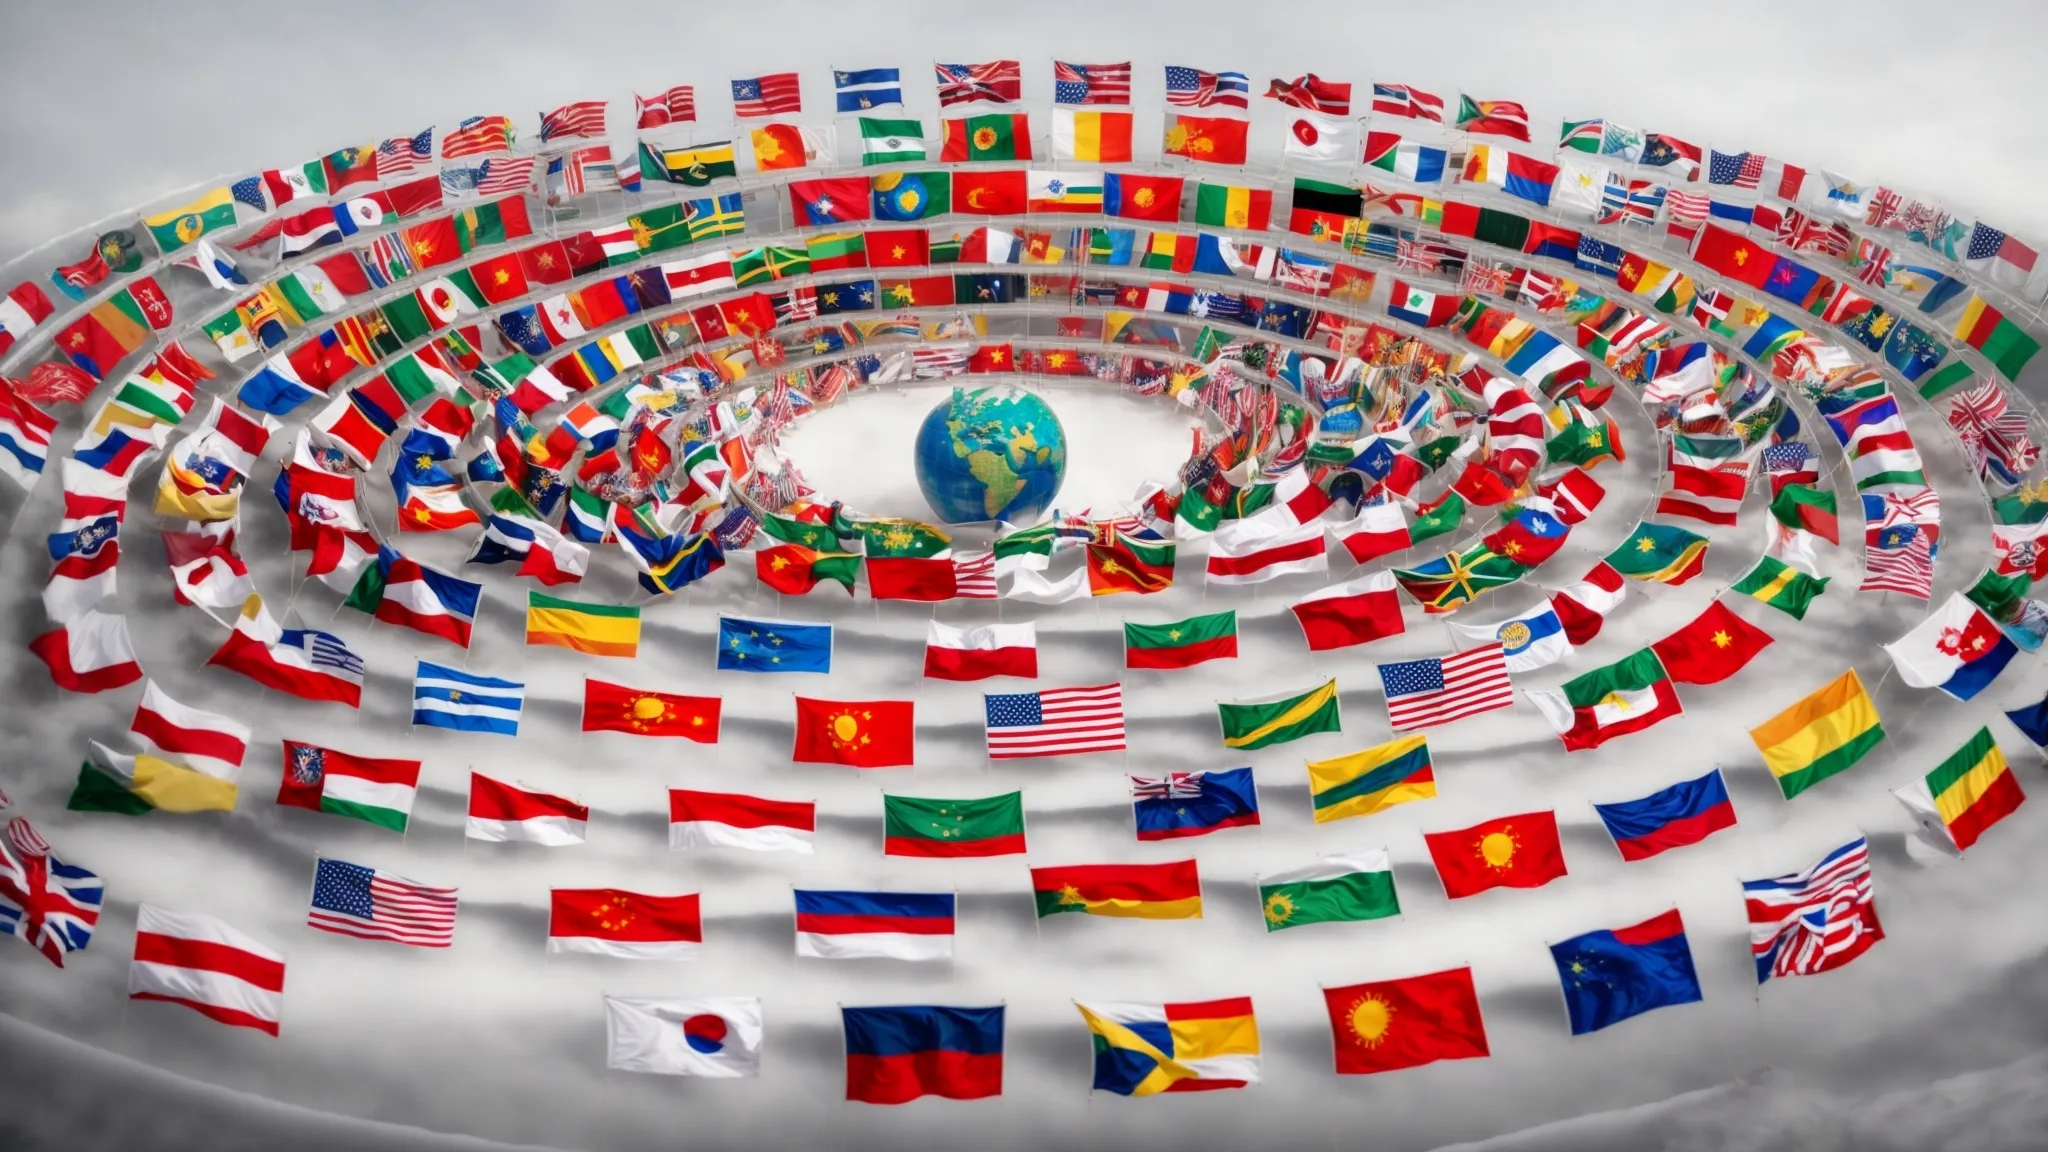 a globe encircled by various flags symbolizes the diversity of languages catered to by a well-structured multilingual website.